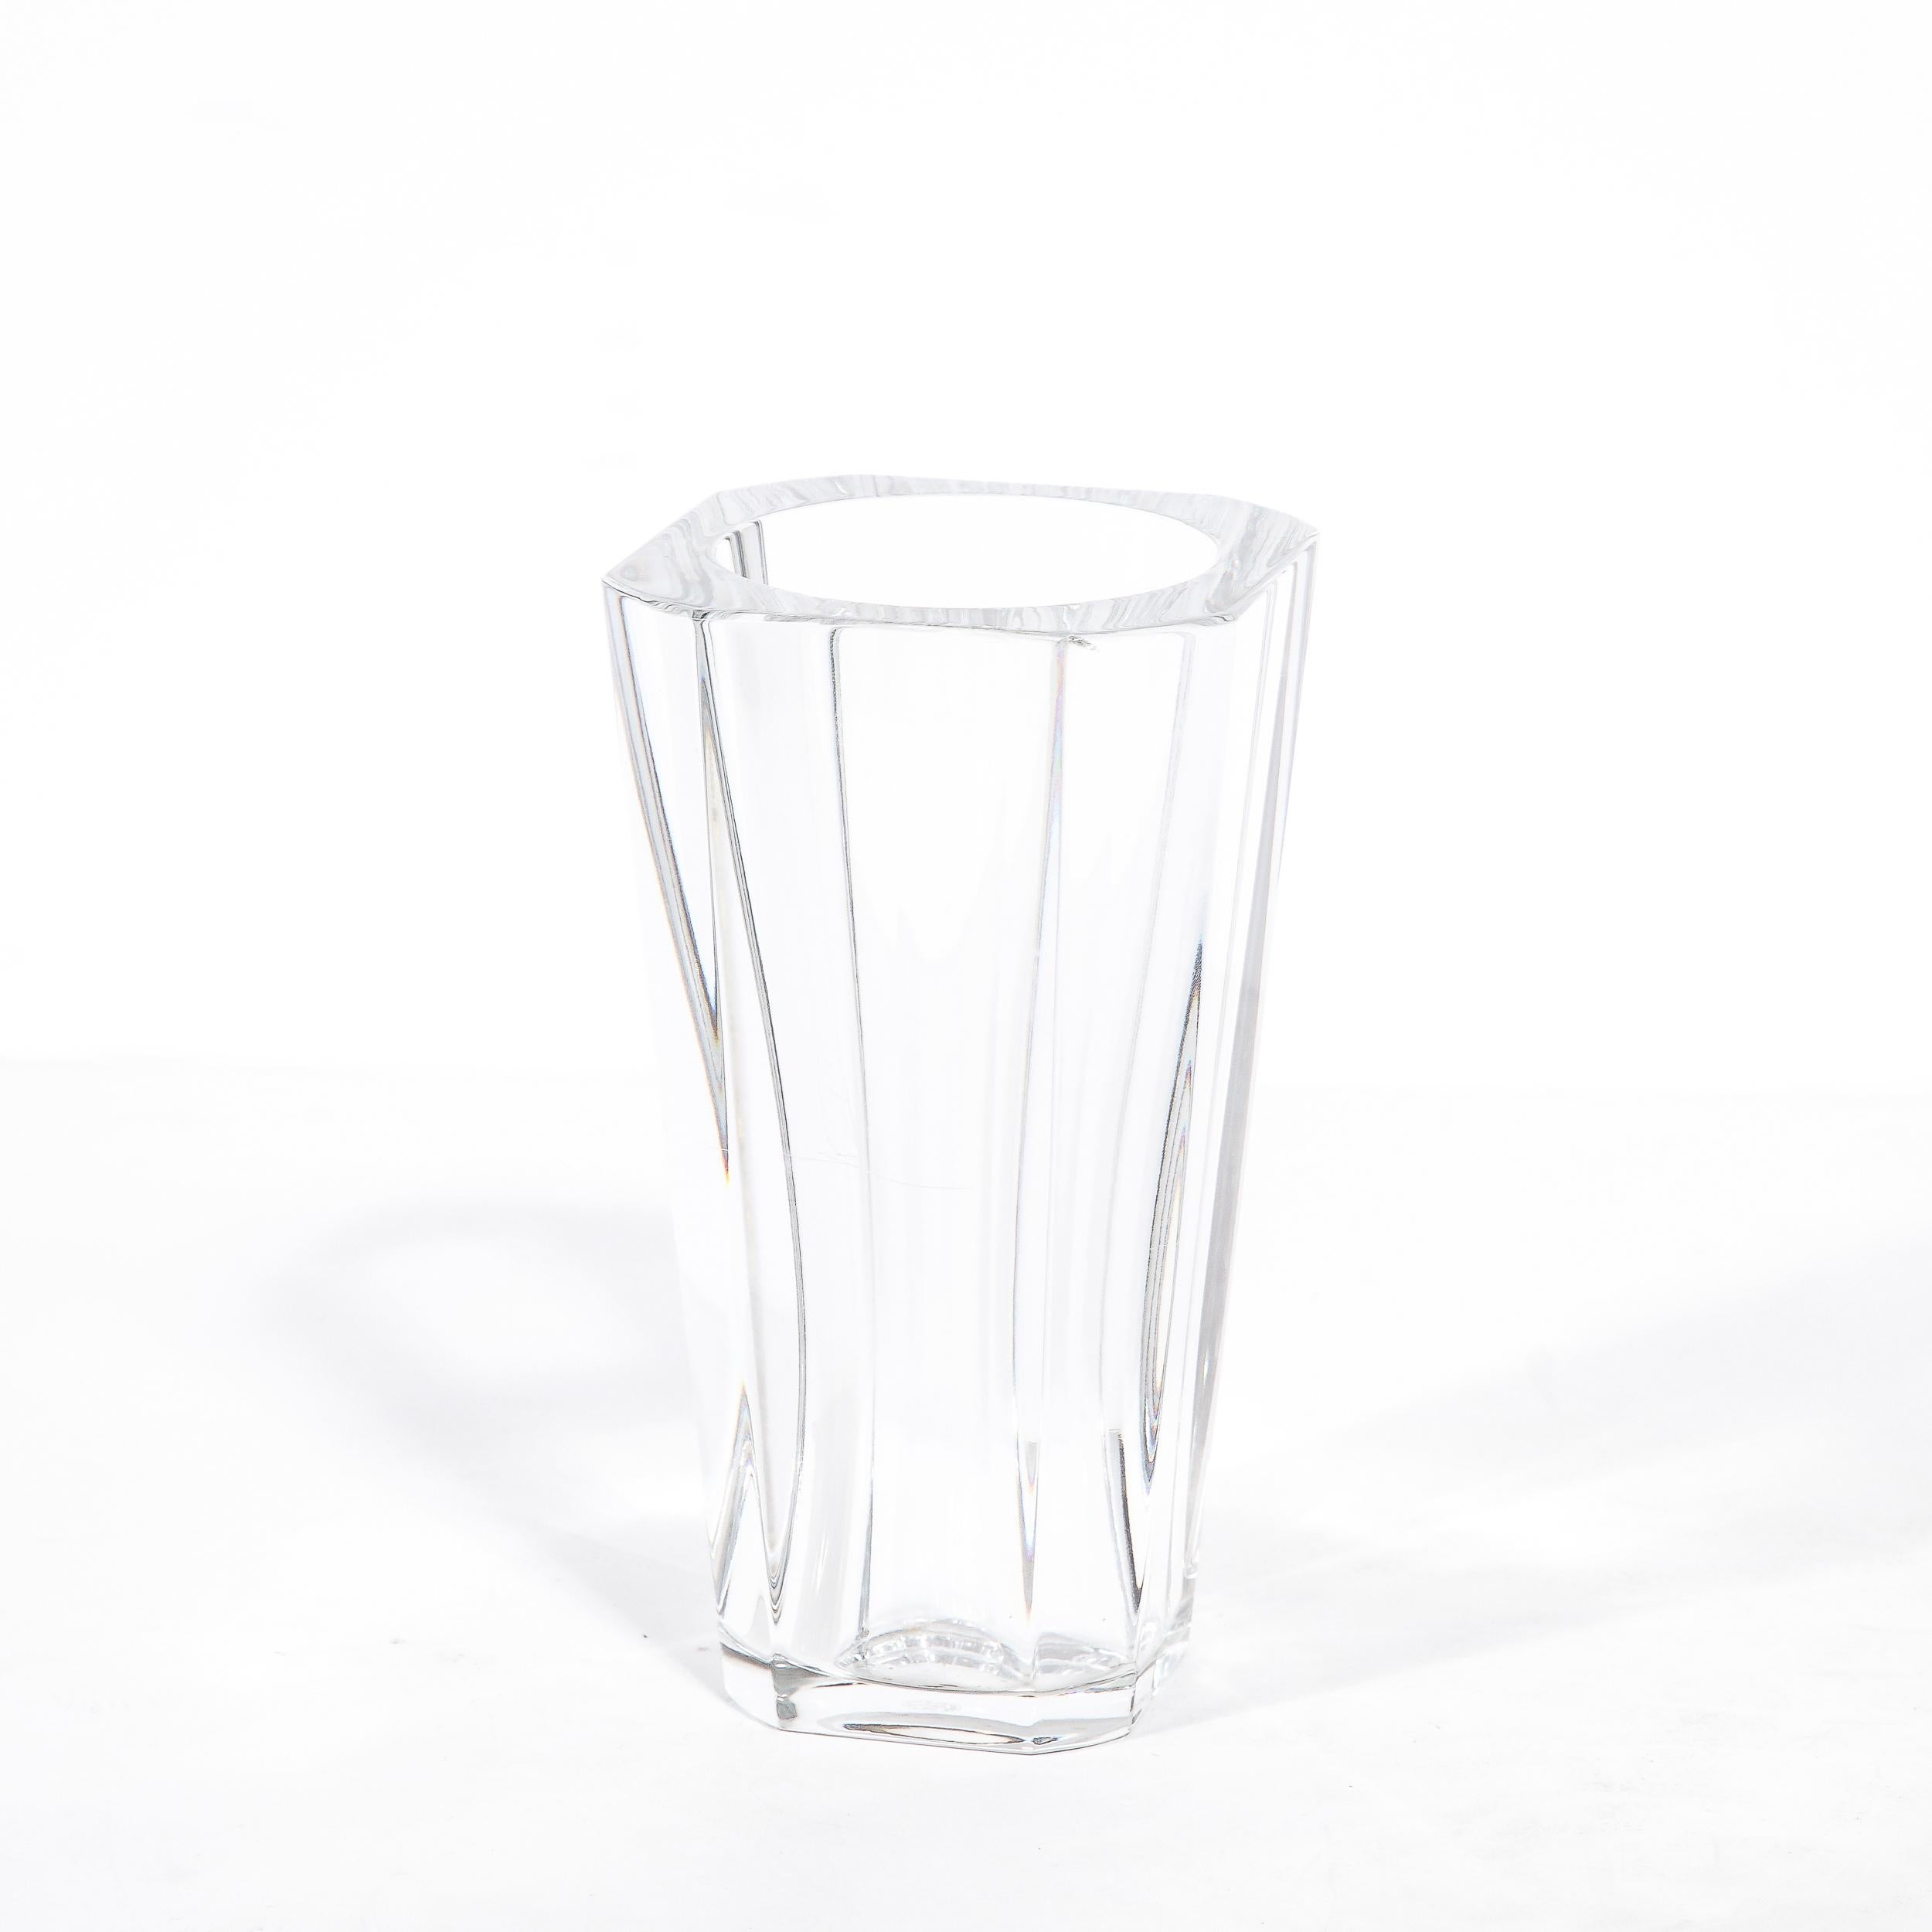 French Modernist Translucent Sculptural Crystal Vase Signed Baccarat  In Excellent Condition For Sale In New York, NY